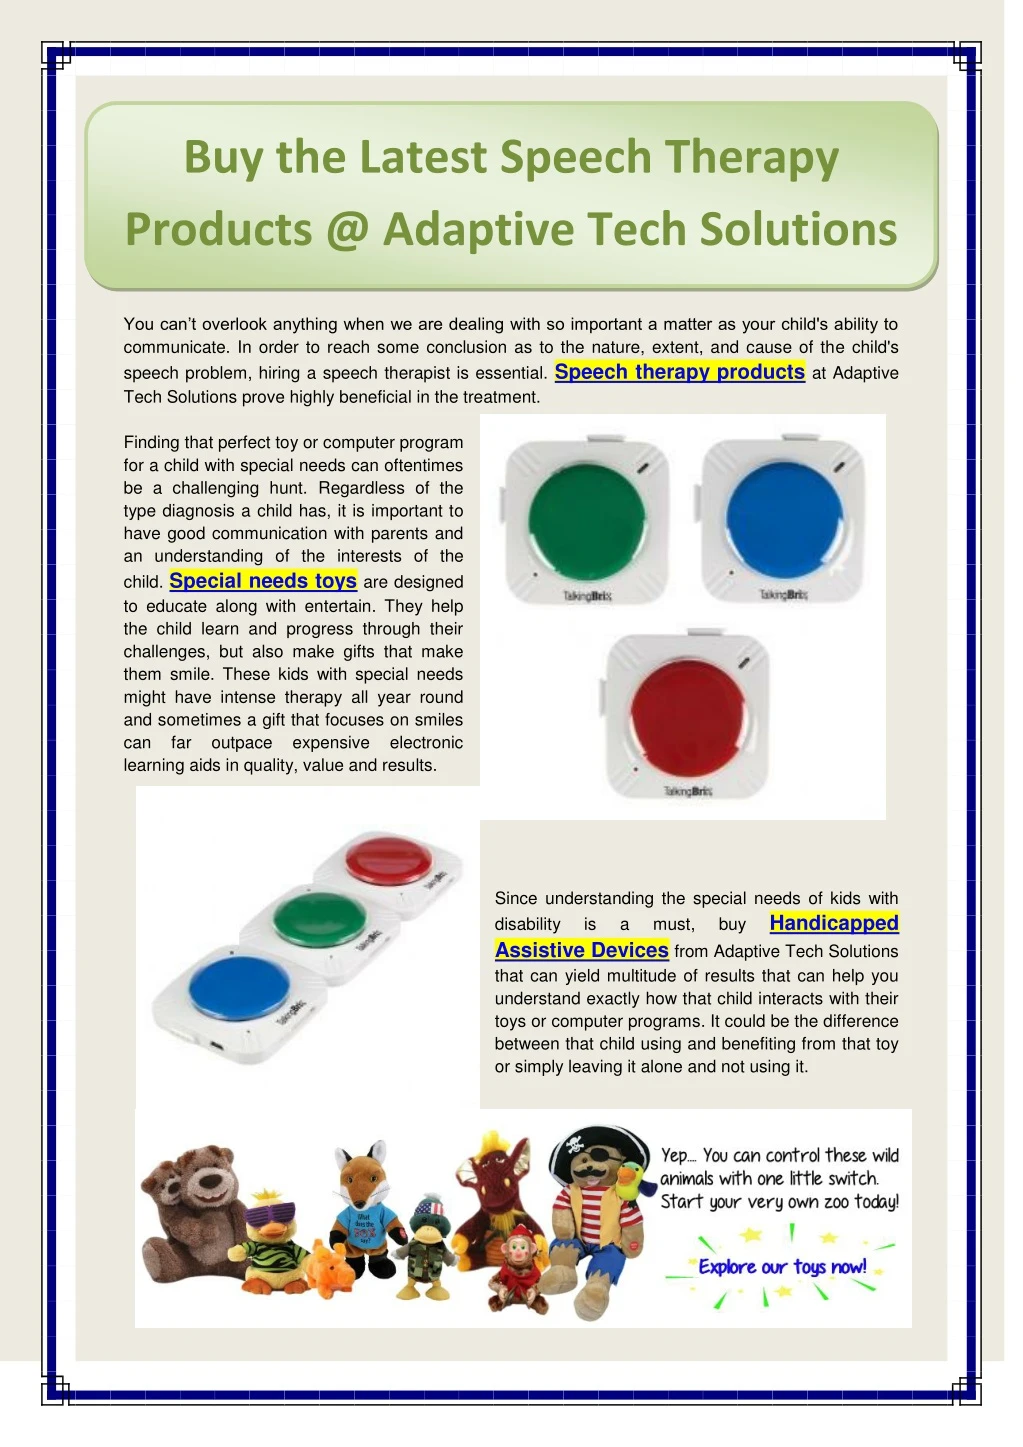 buy the latest speech therapy products @ adaptive